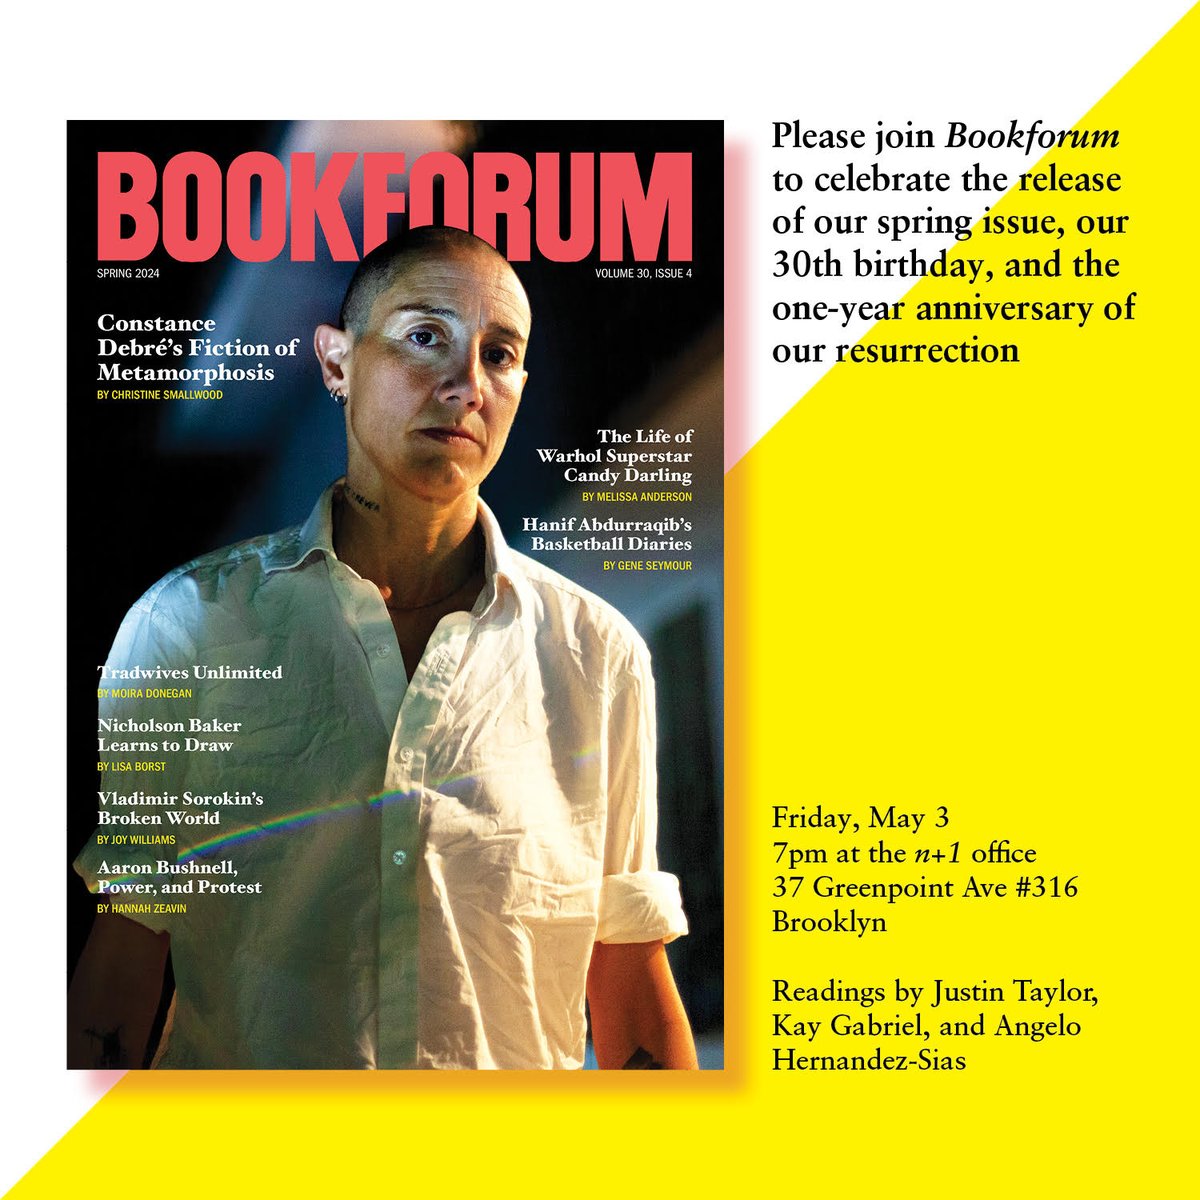 BOOKFORUM PARTY on May 3! Big thanks to our friends at @nplusonemag for hosting. Free to attend, RSVP required: eventbrite.com/e/bookforum-pa…